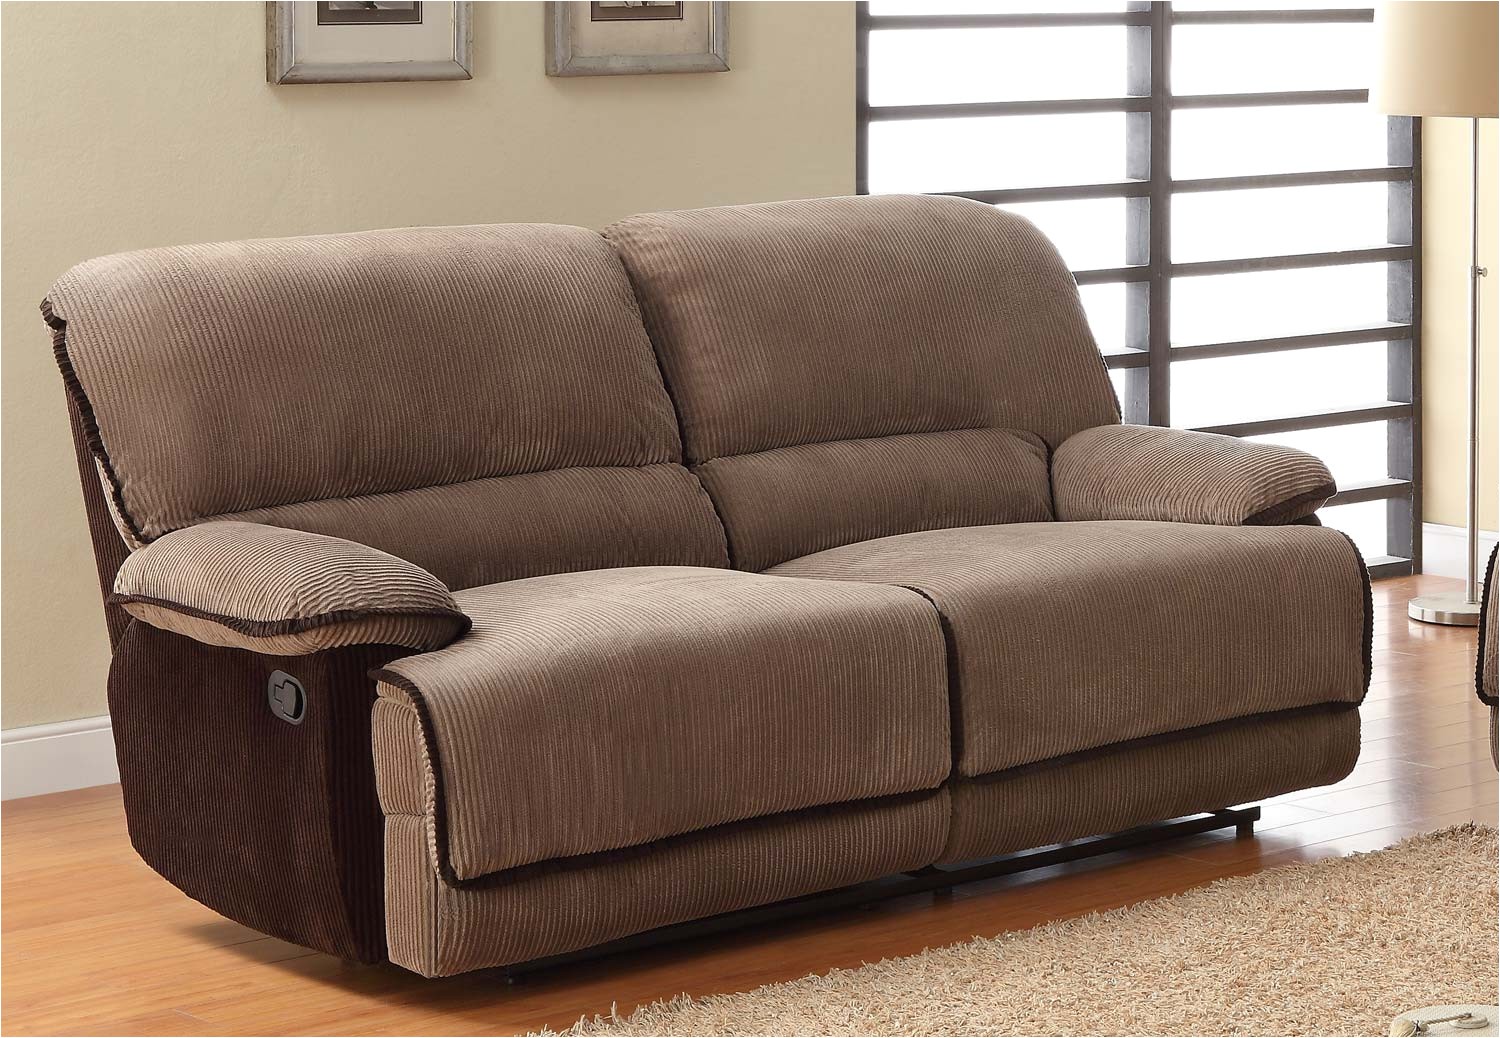 Double Reclining sofa Slipcover Singular Dual Reclining sofa Picture Ideas Dallas withe Meridian 54